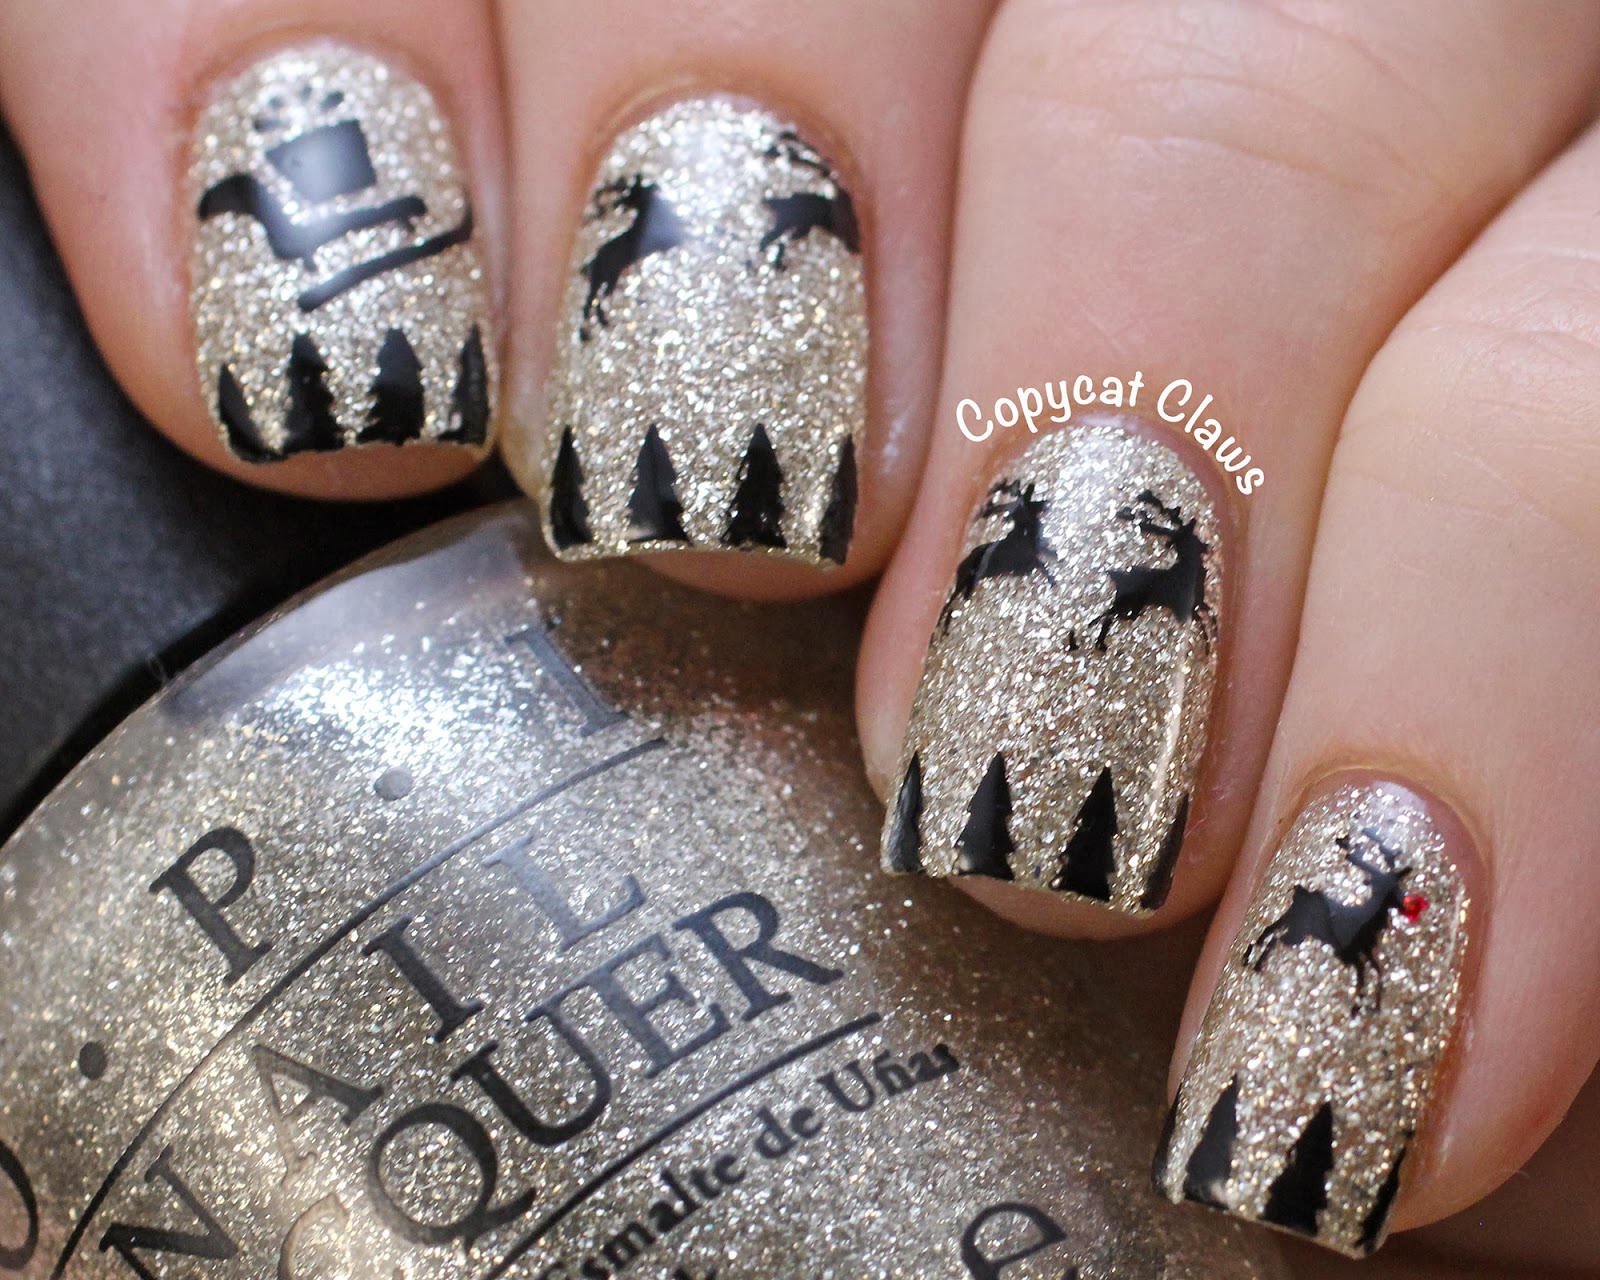 9. "Adorable Reindeer Nail Art for the Holidays" - wide 2